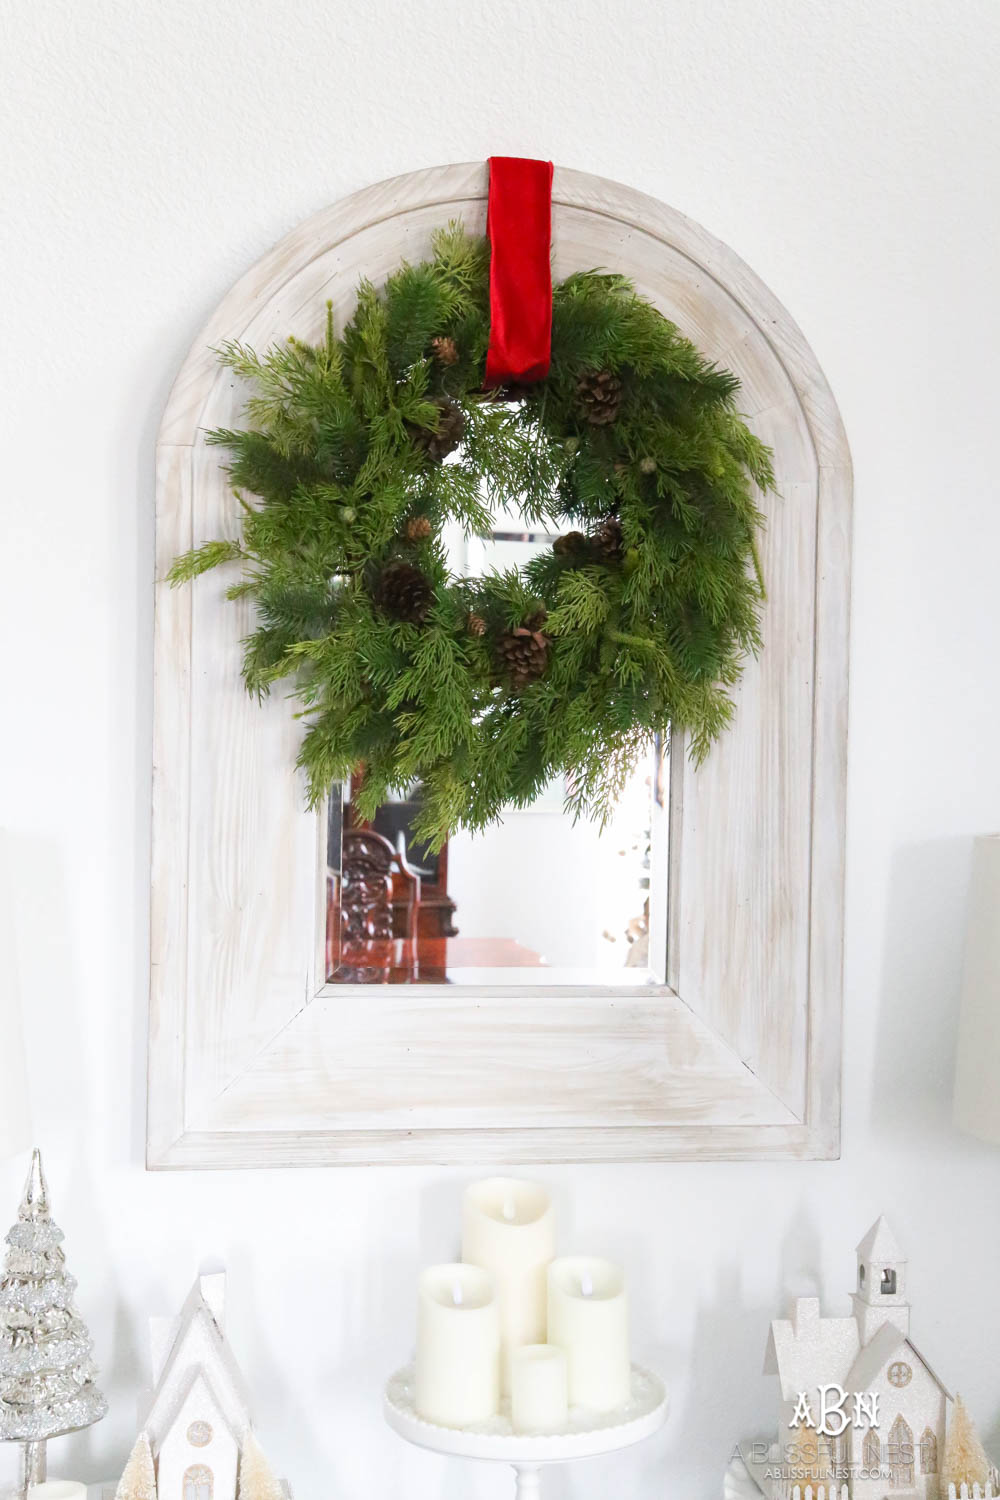 Simple classic Christmas wreath detail on a mirror in an entry. Simple holiday decor that makes a big impact. Red ribbon on a plain wreath. White walls in this holiday home which makes the décor really pop. #christmasentryway #christmasentry #christmasentrydecor #christmasentrywayideas #christmashometour